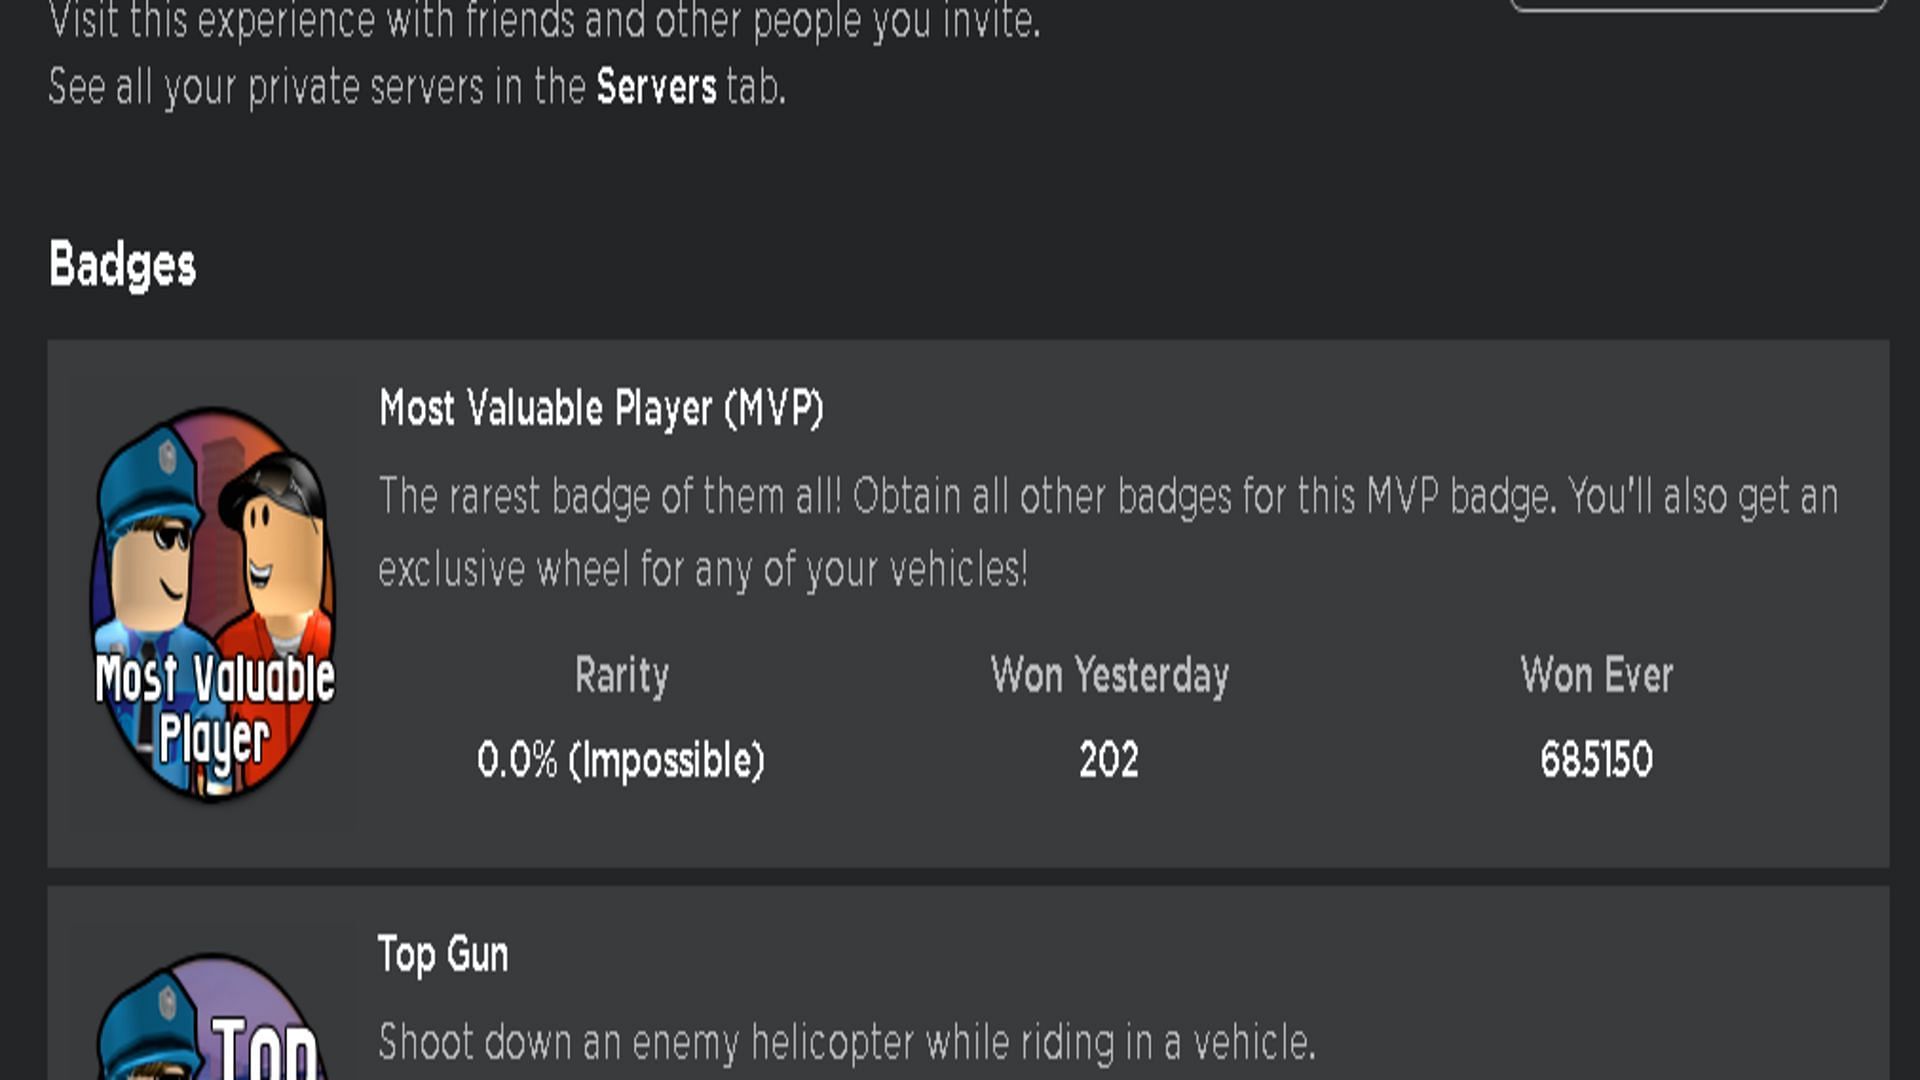 MVP stands for &quot;Most Valuable Player&quot; (Image via Roblox)